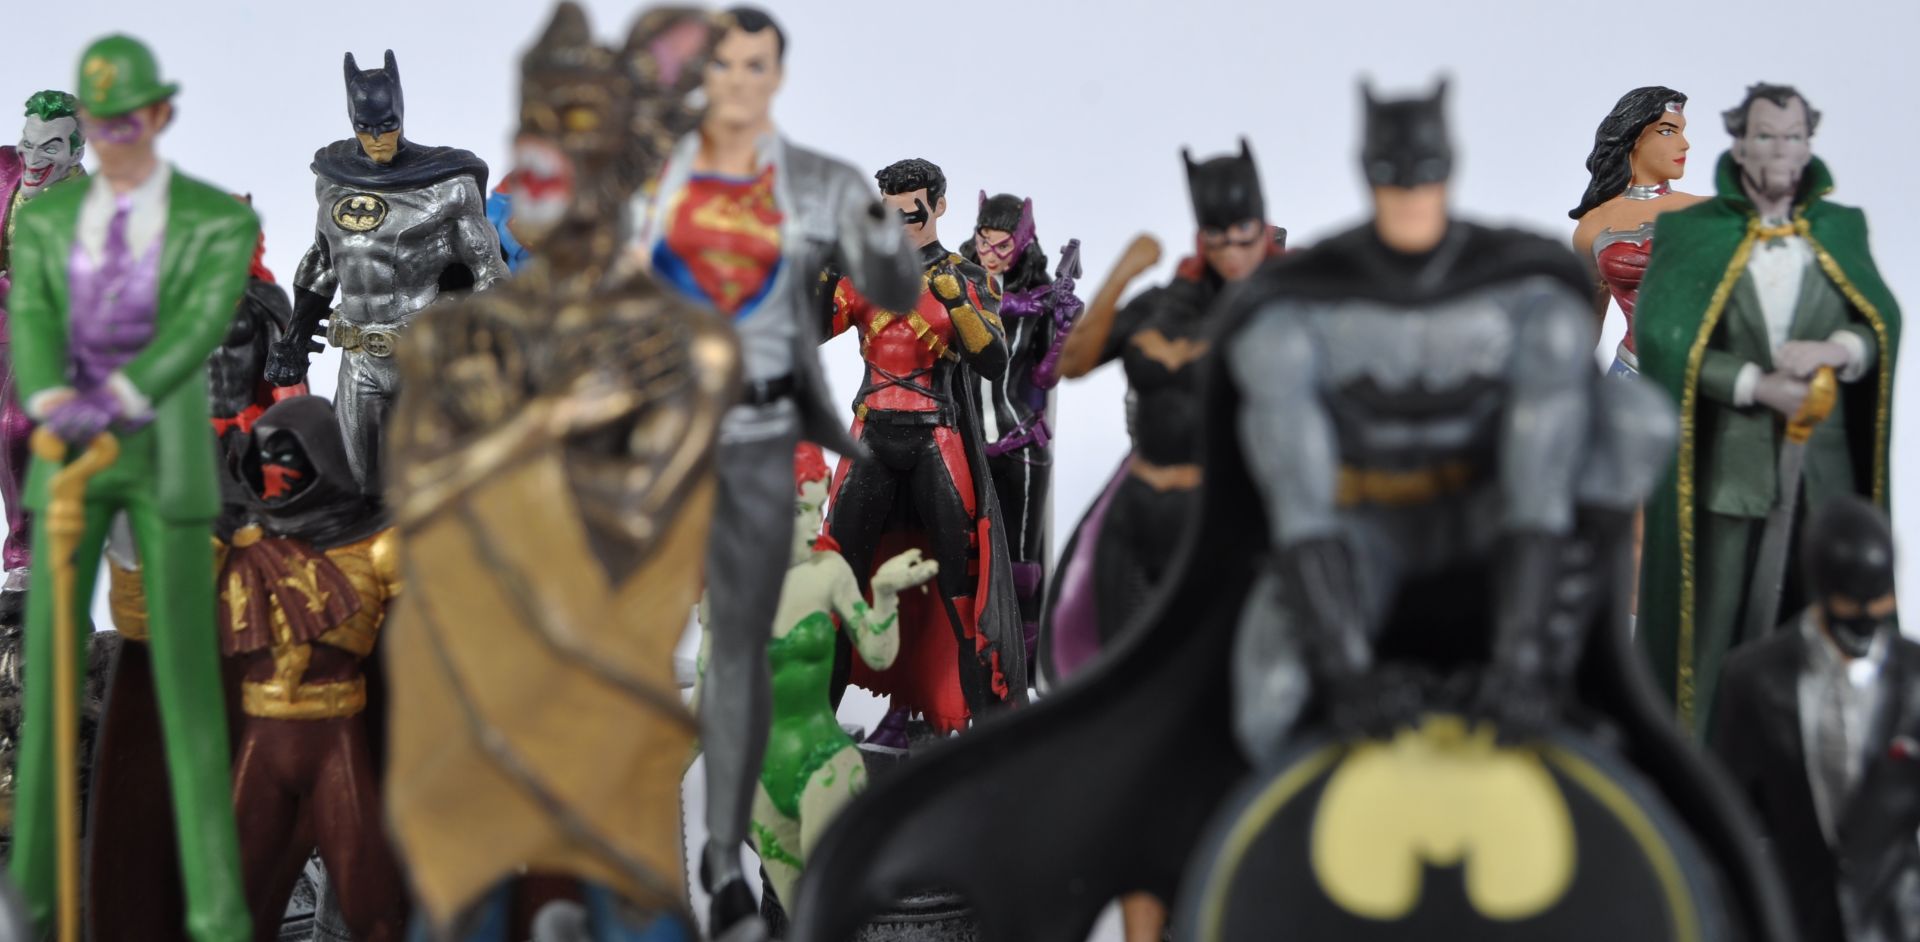 A COLLECTION OF DC COMIC RELATED EAGLEMOSS FIGURES - Image 8 of 8